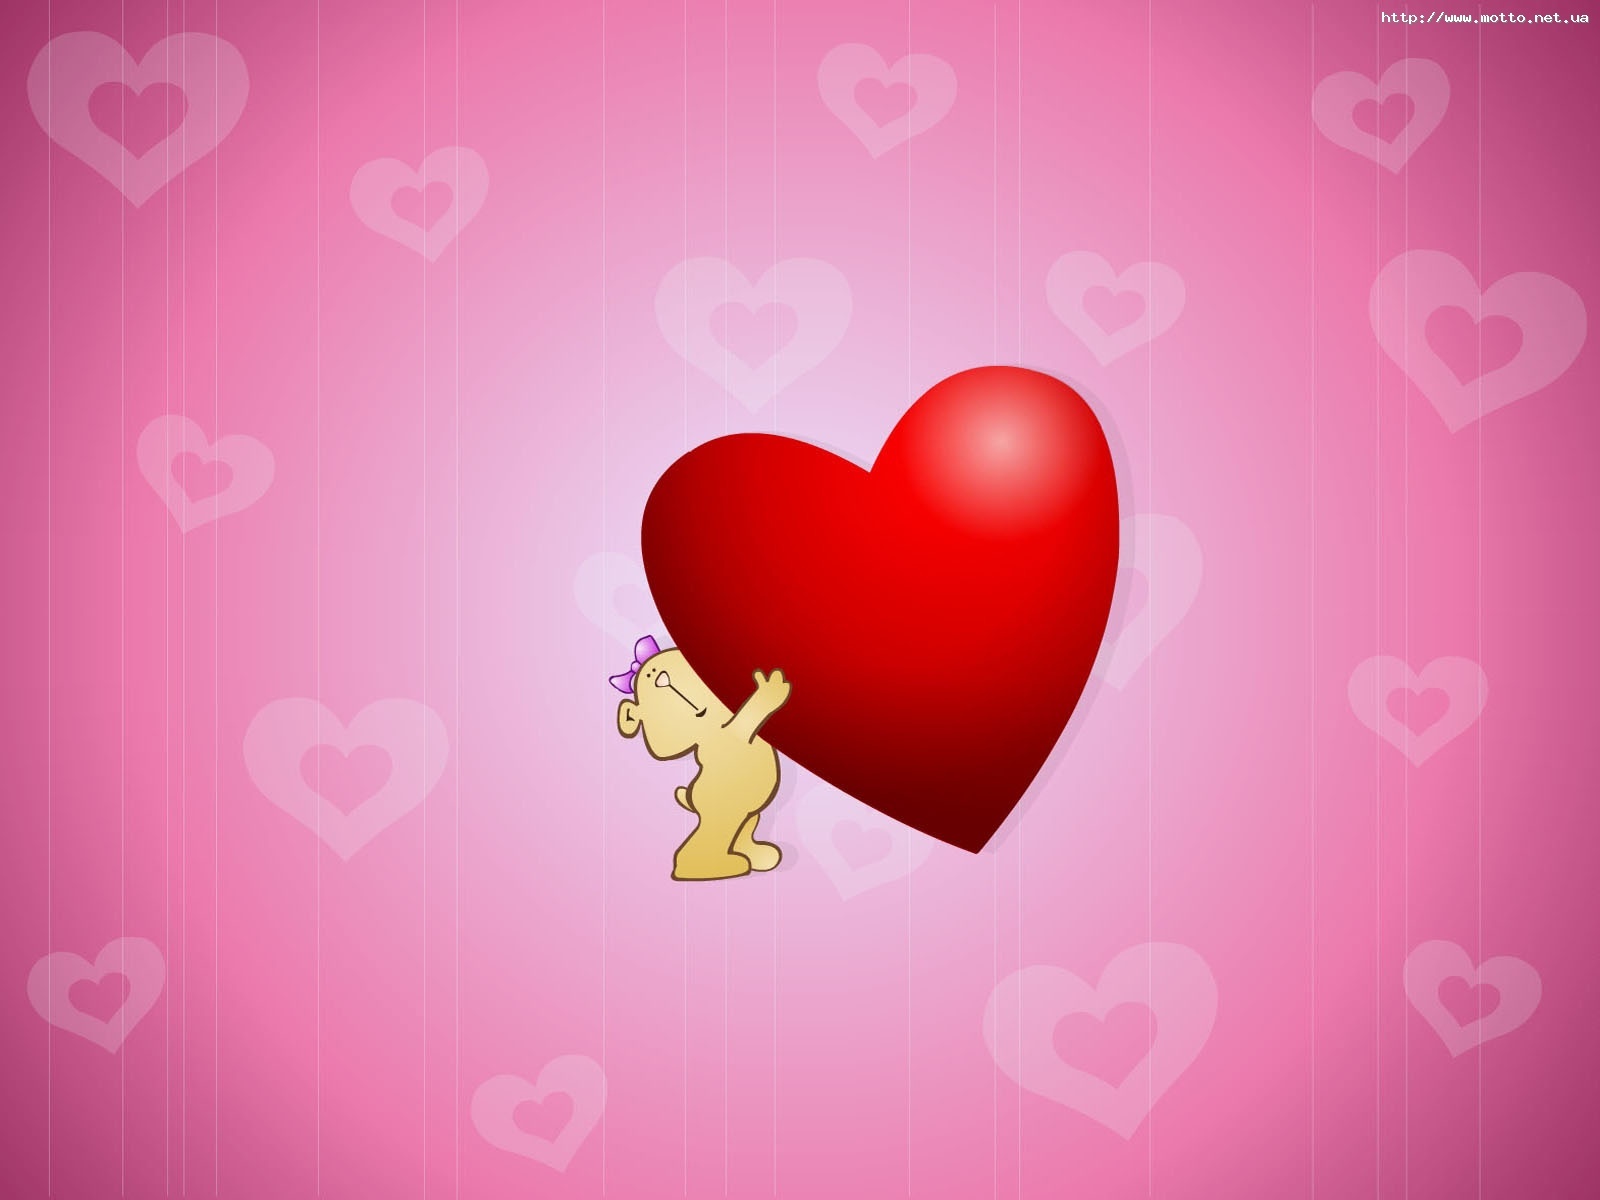 Wallpaper Full HD love, holidays, hearts, valentine's day, pictures, red